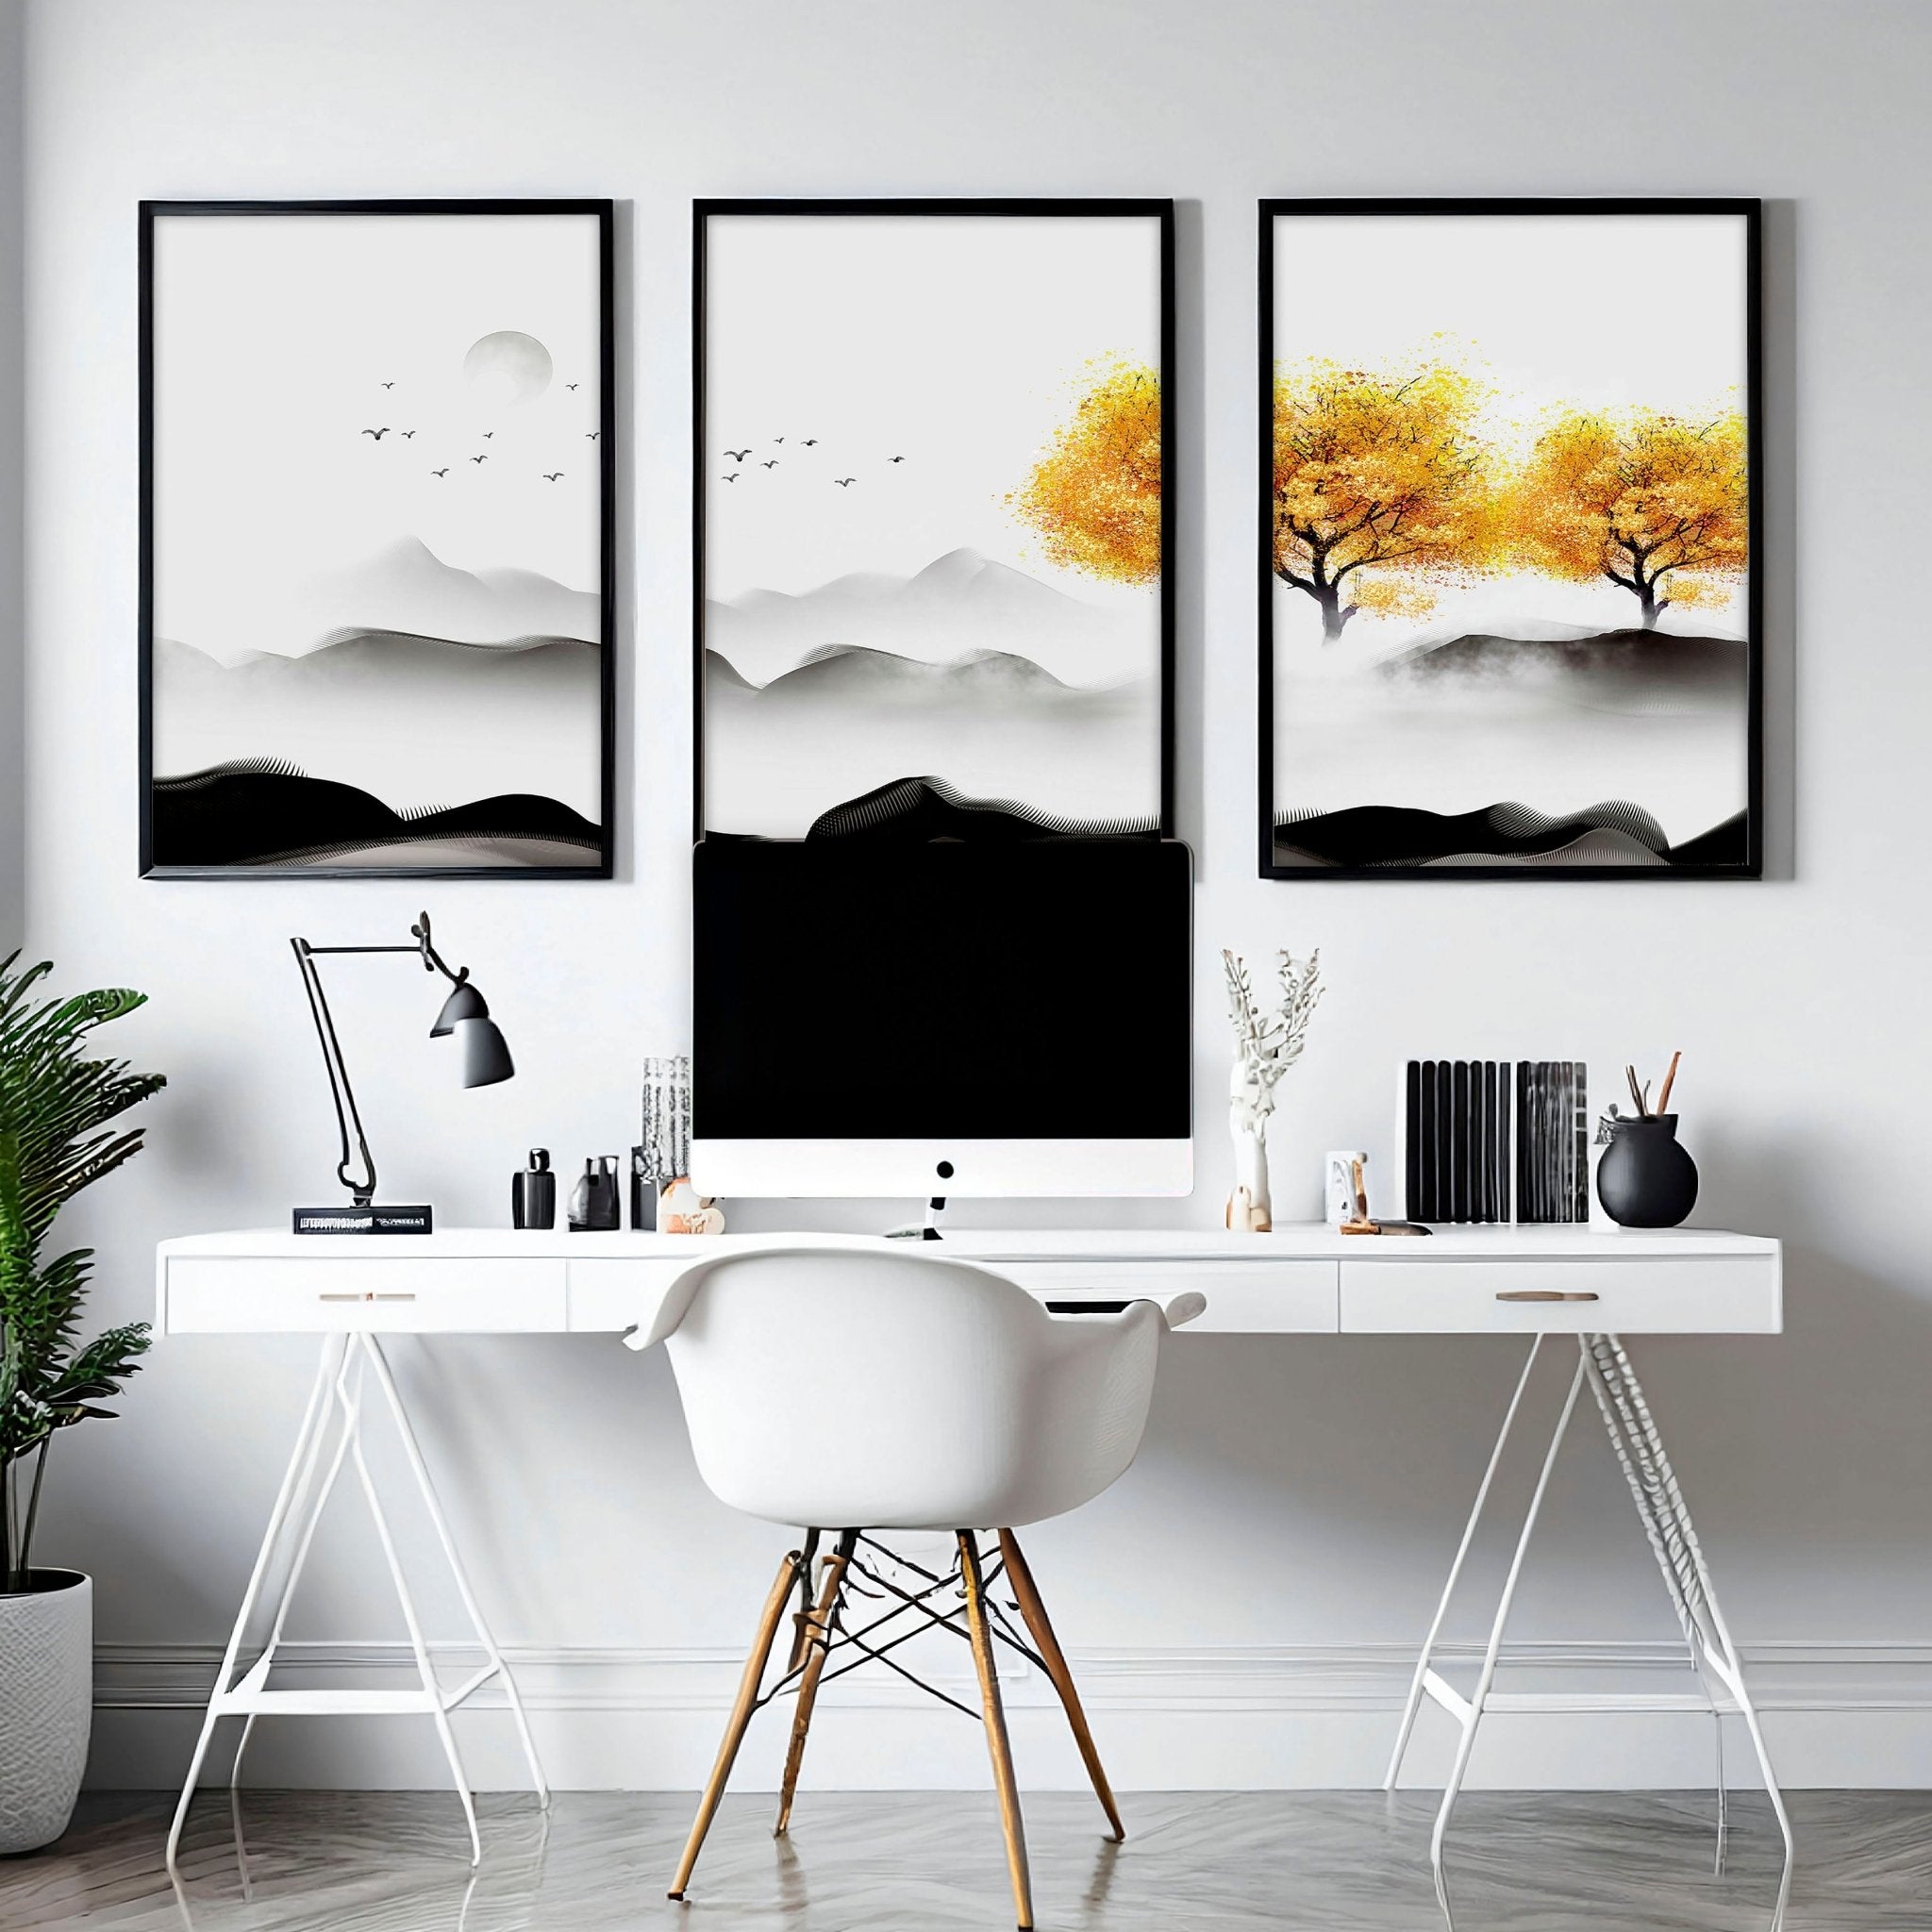 Prints for Home Office walls | set of 3 wall art prints